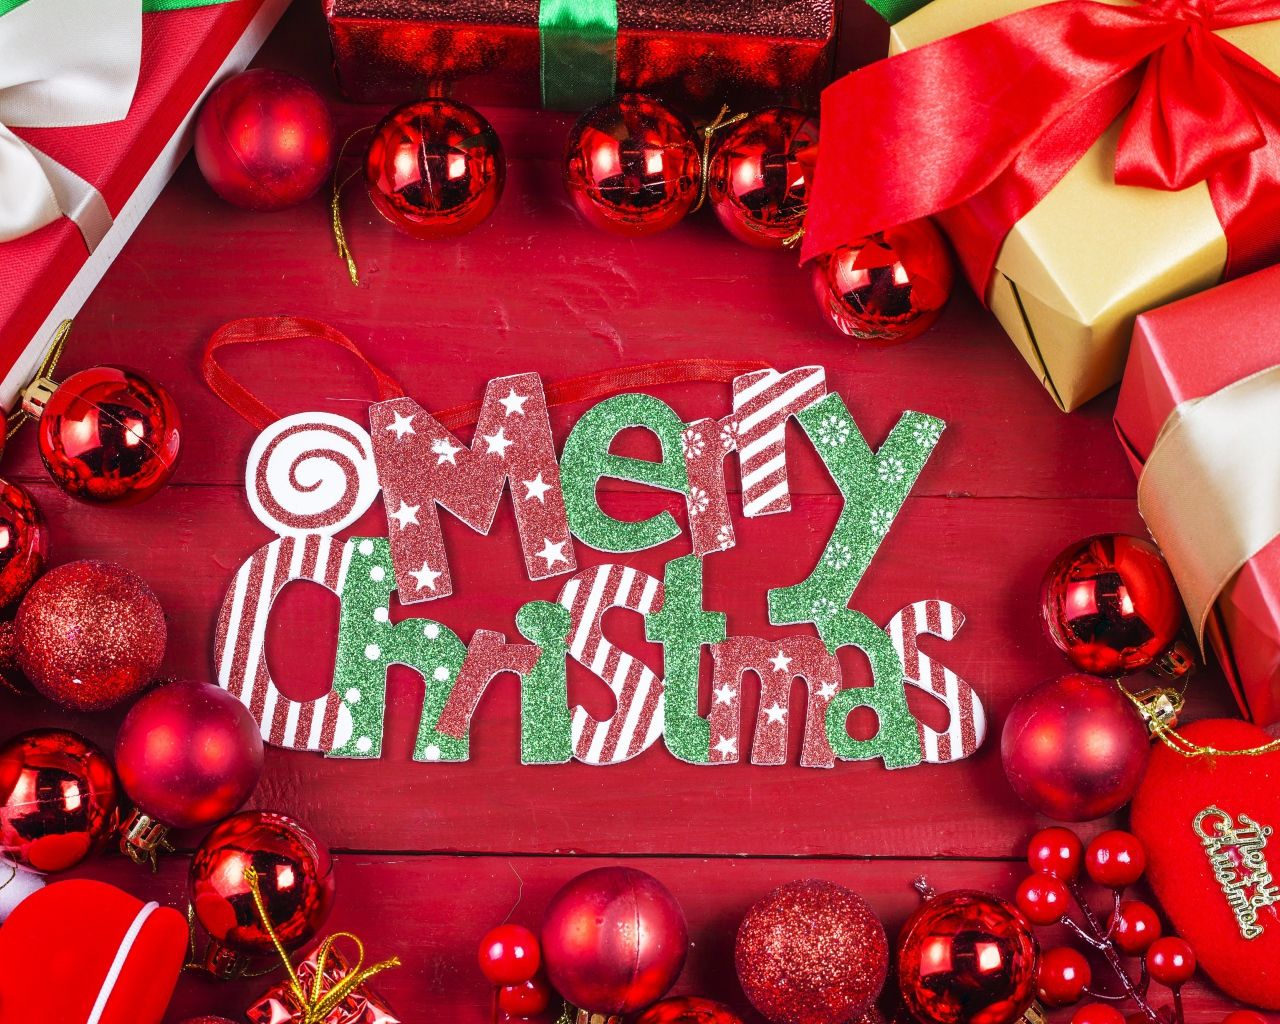 Merry Christmas holiday inscription on a red background with toys and gifts Desktop wallpaper 1280x1024